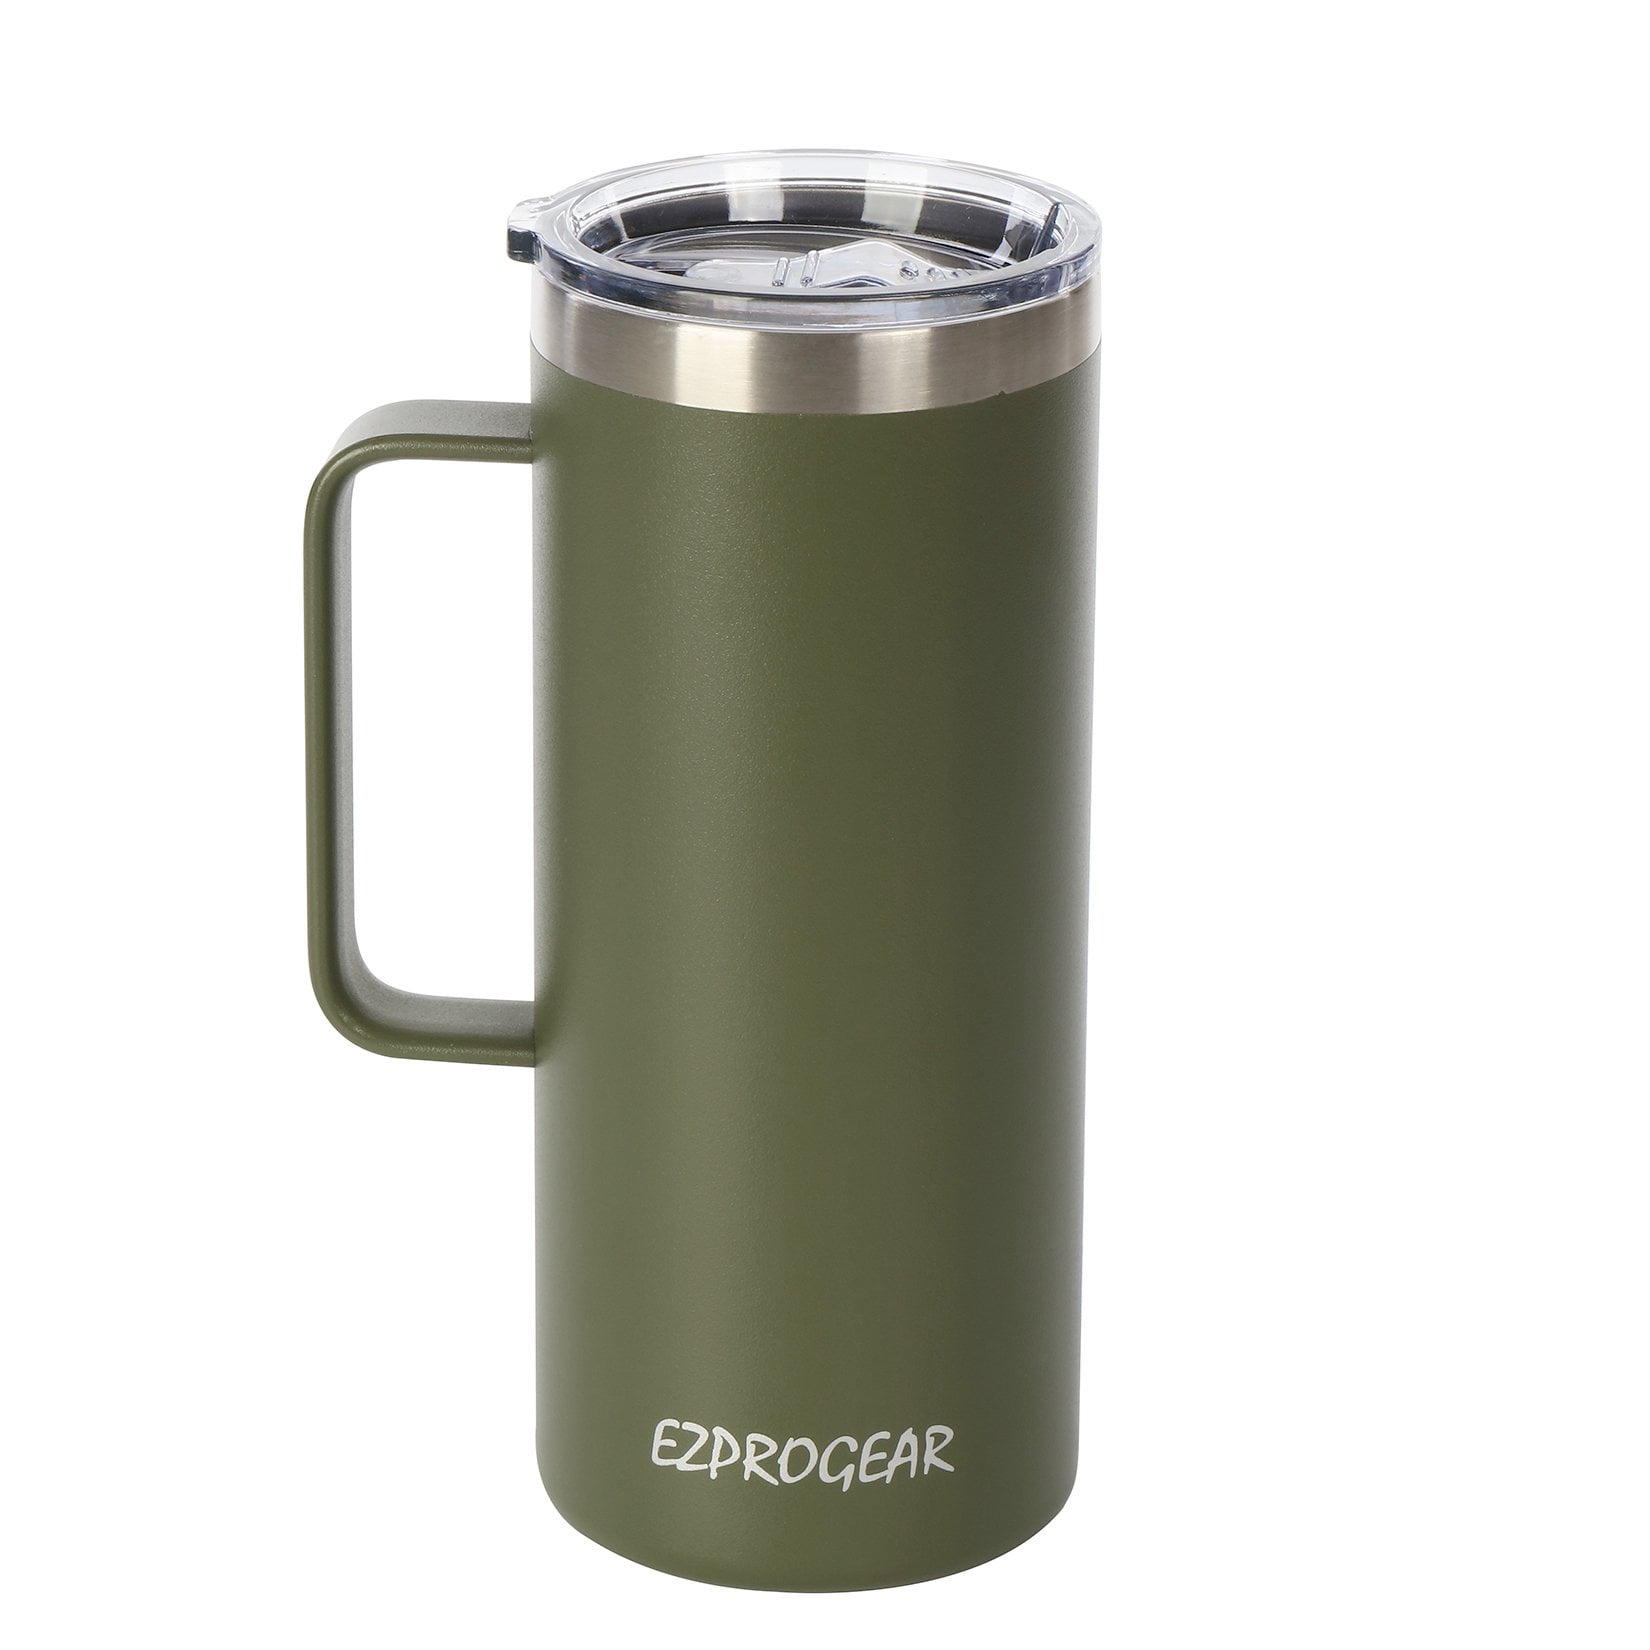 GREENWORKS : Stainless Steel Thermos Coffee Mug with Handle